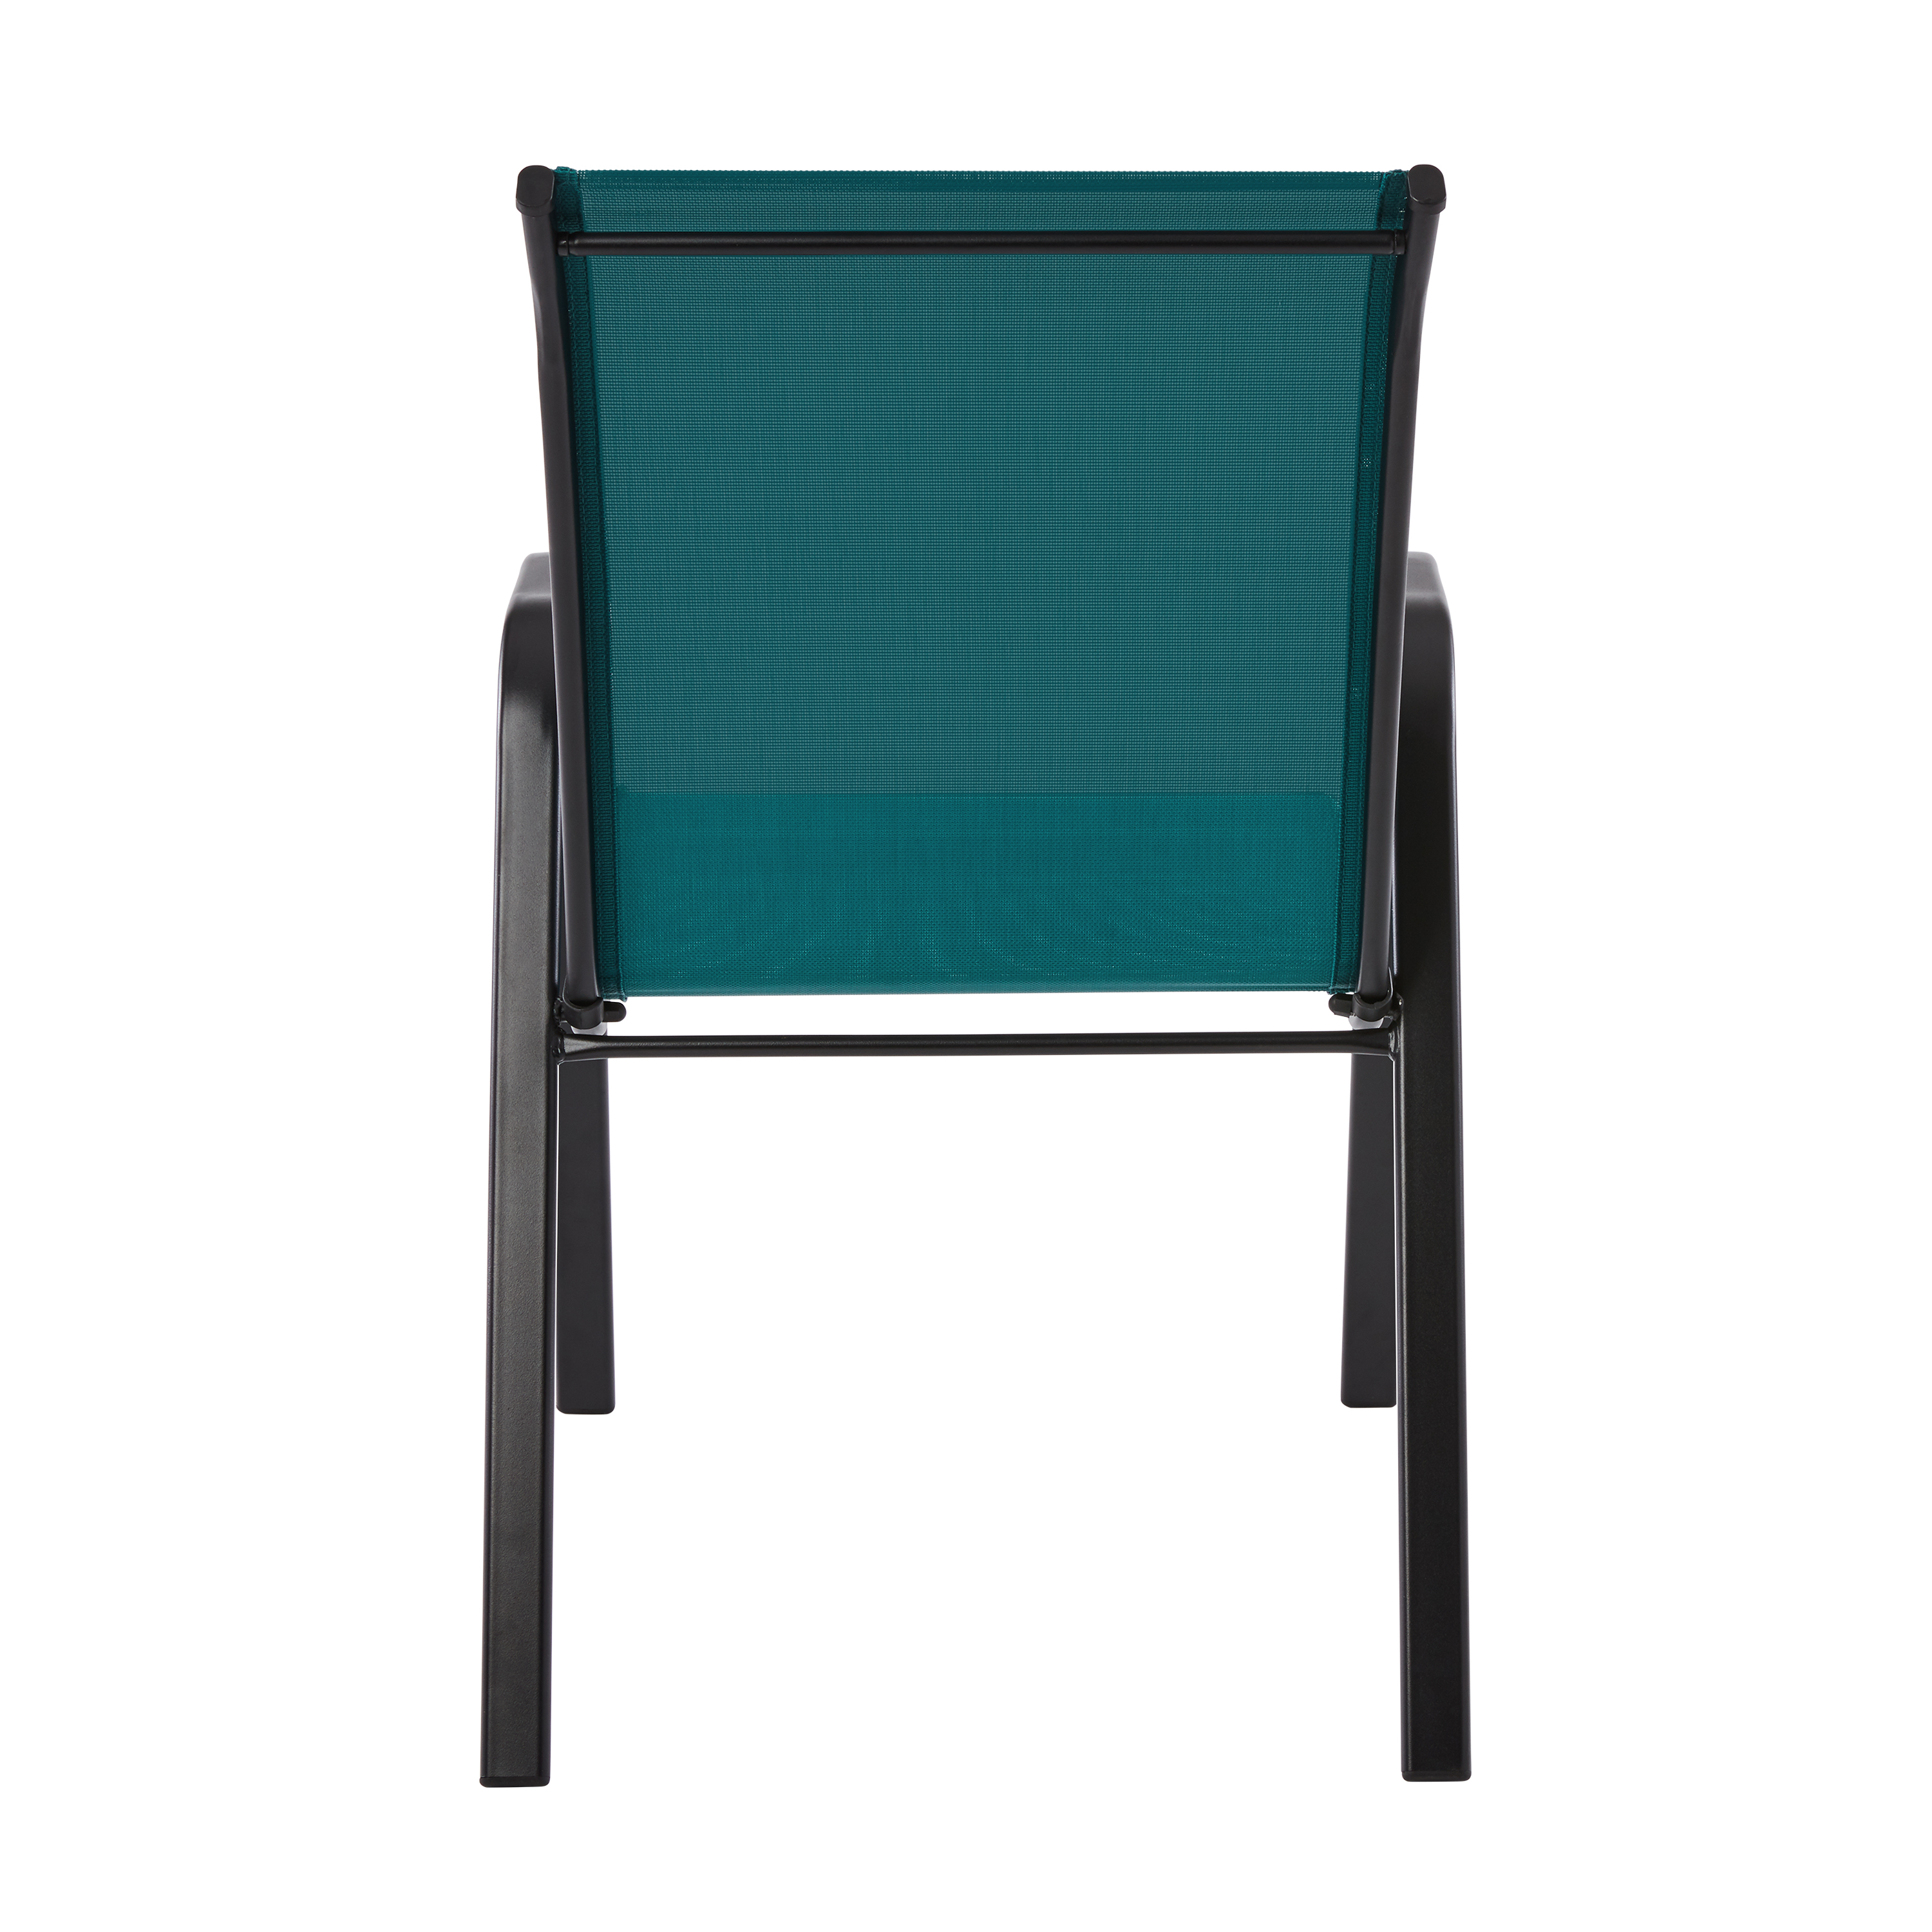 Mainstays Heritage Park Steel Stacking Chair, Teal - image 2 of 9